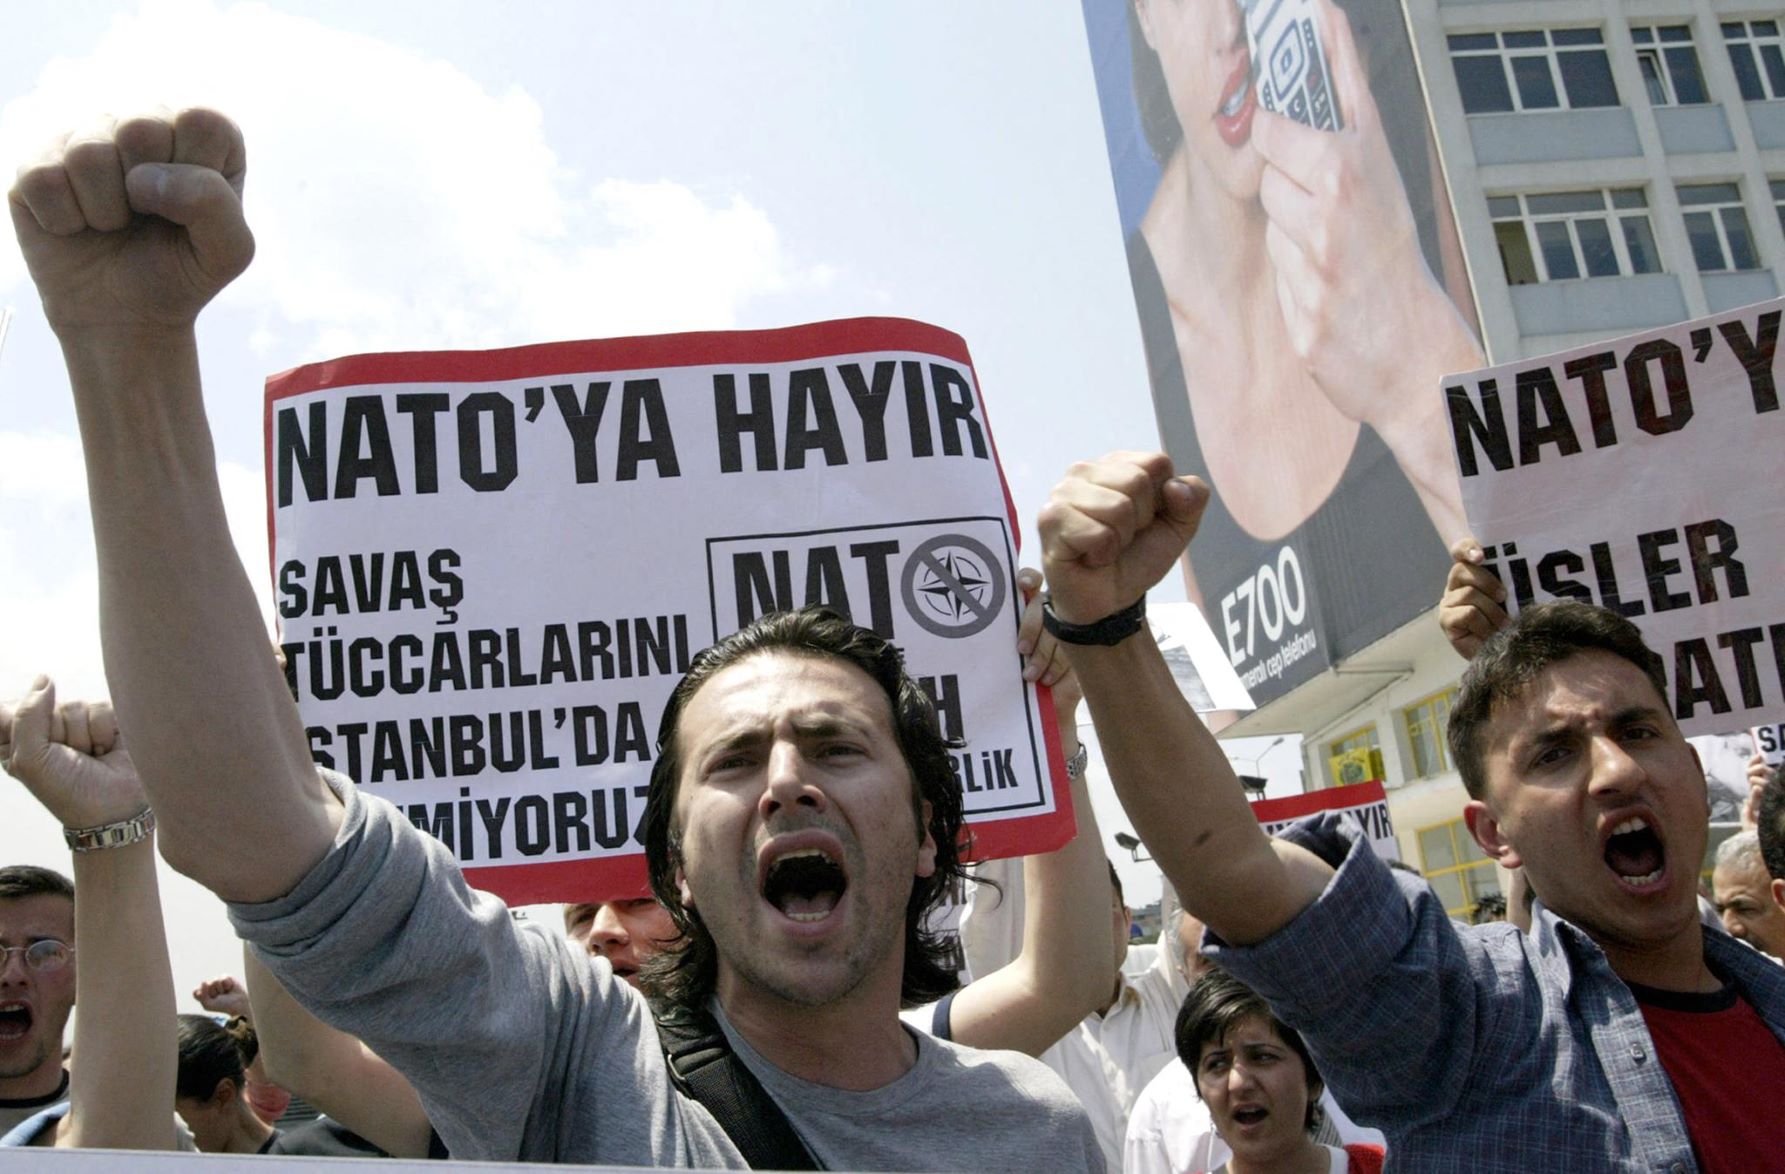 Two Turkish protestors chant slogans "We don`t want NATO" as the others hold banner that reads "No to Nato" during the demonstration against the upcoming NATO meeting in downtown Istanbul, 2004 (AFP)